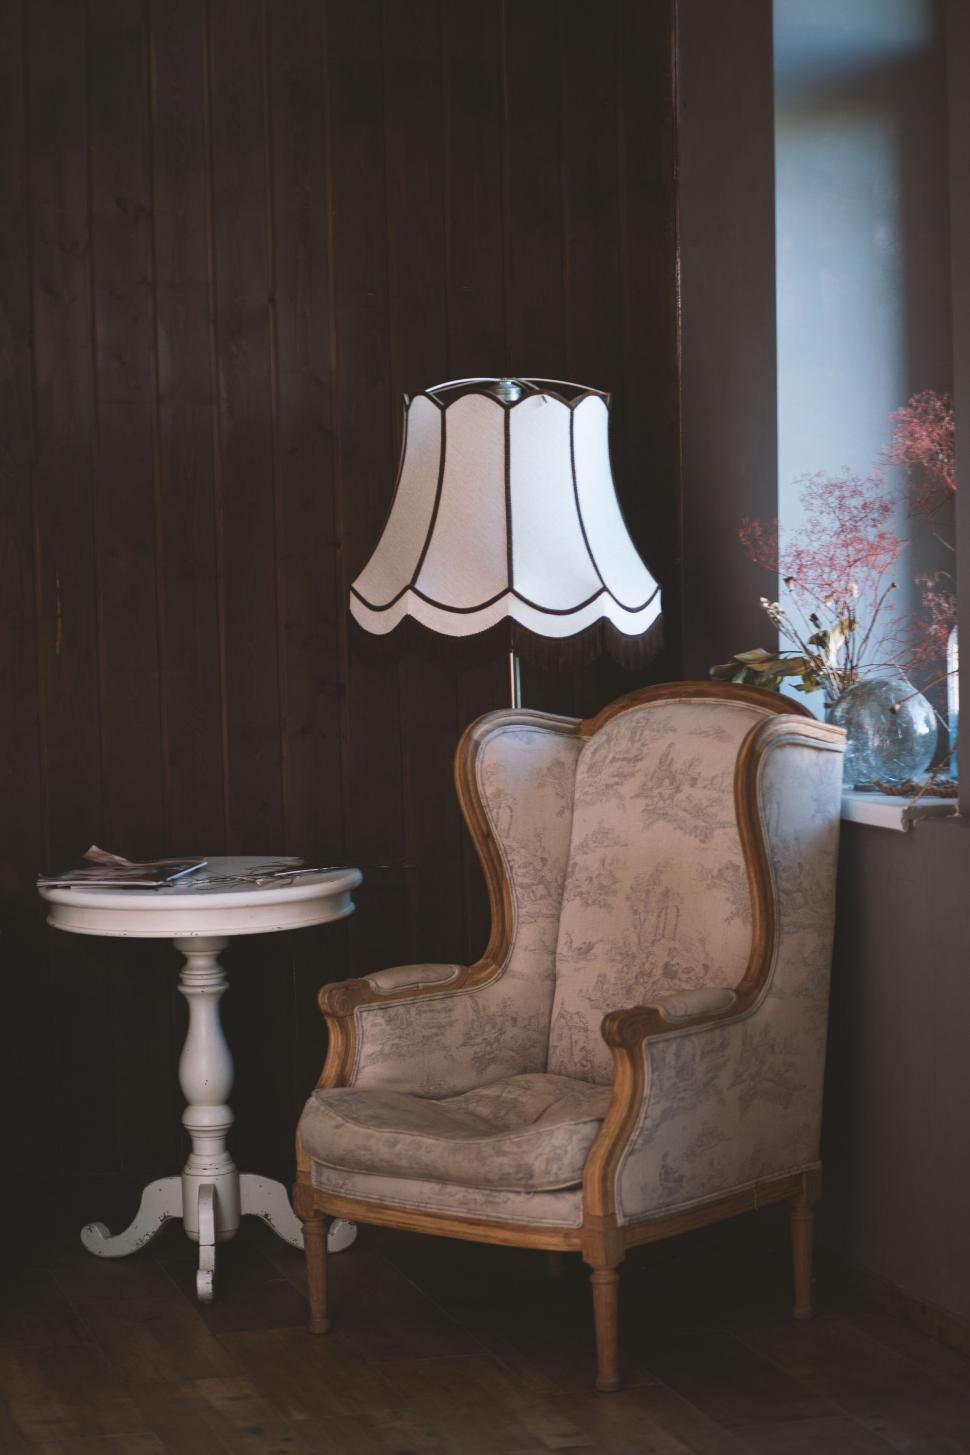 Free Image of Vintage armchair and standing lamp 